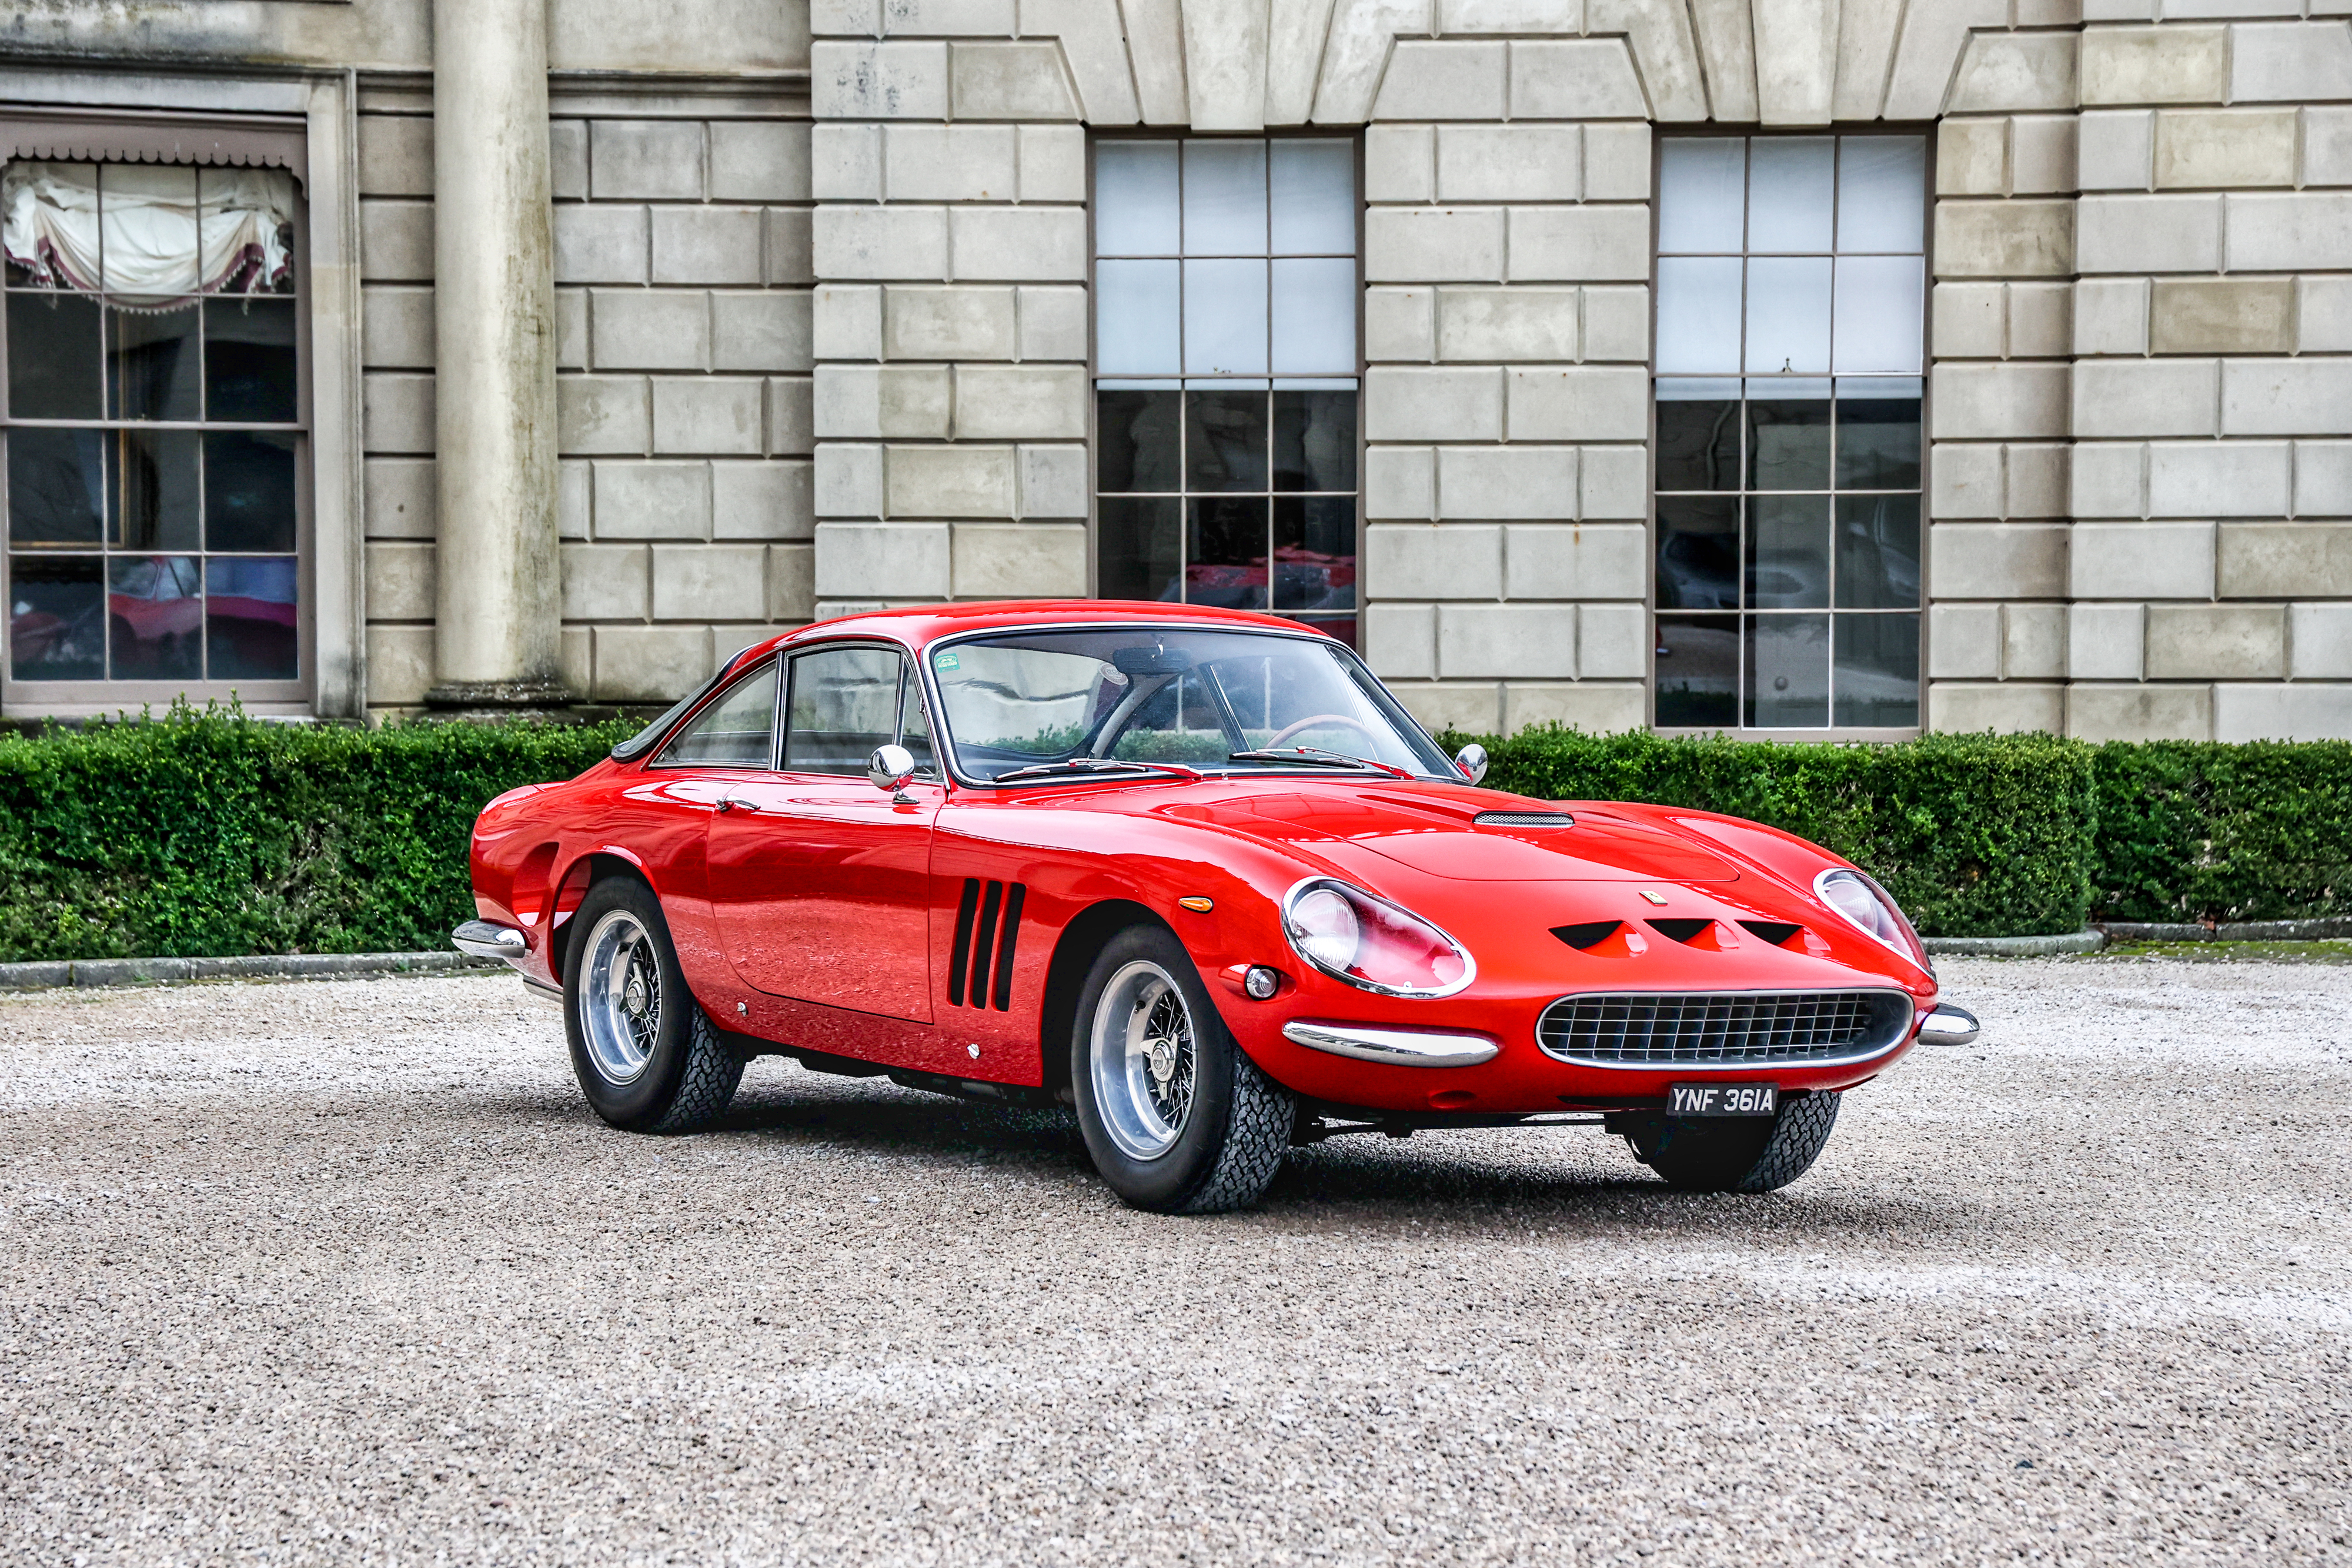 A 1963 Ferrari has gone up for auction for £1.5 million